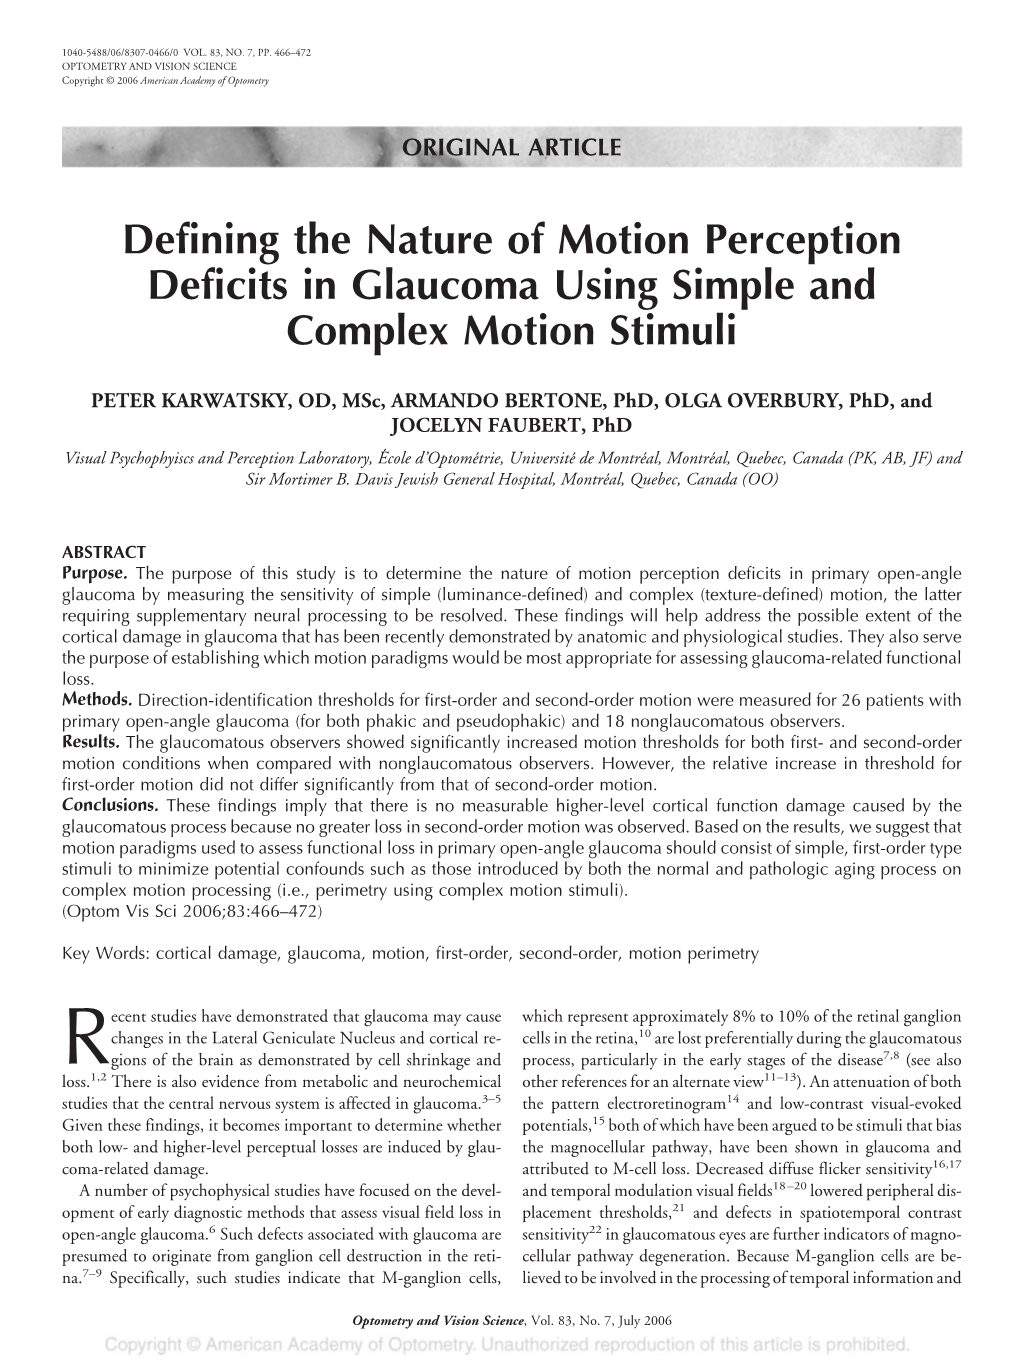 Defining the Nature of Motion Perception Deficits in Glaucoma Using Simple and Complex Motion Stimuli